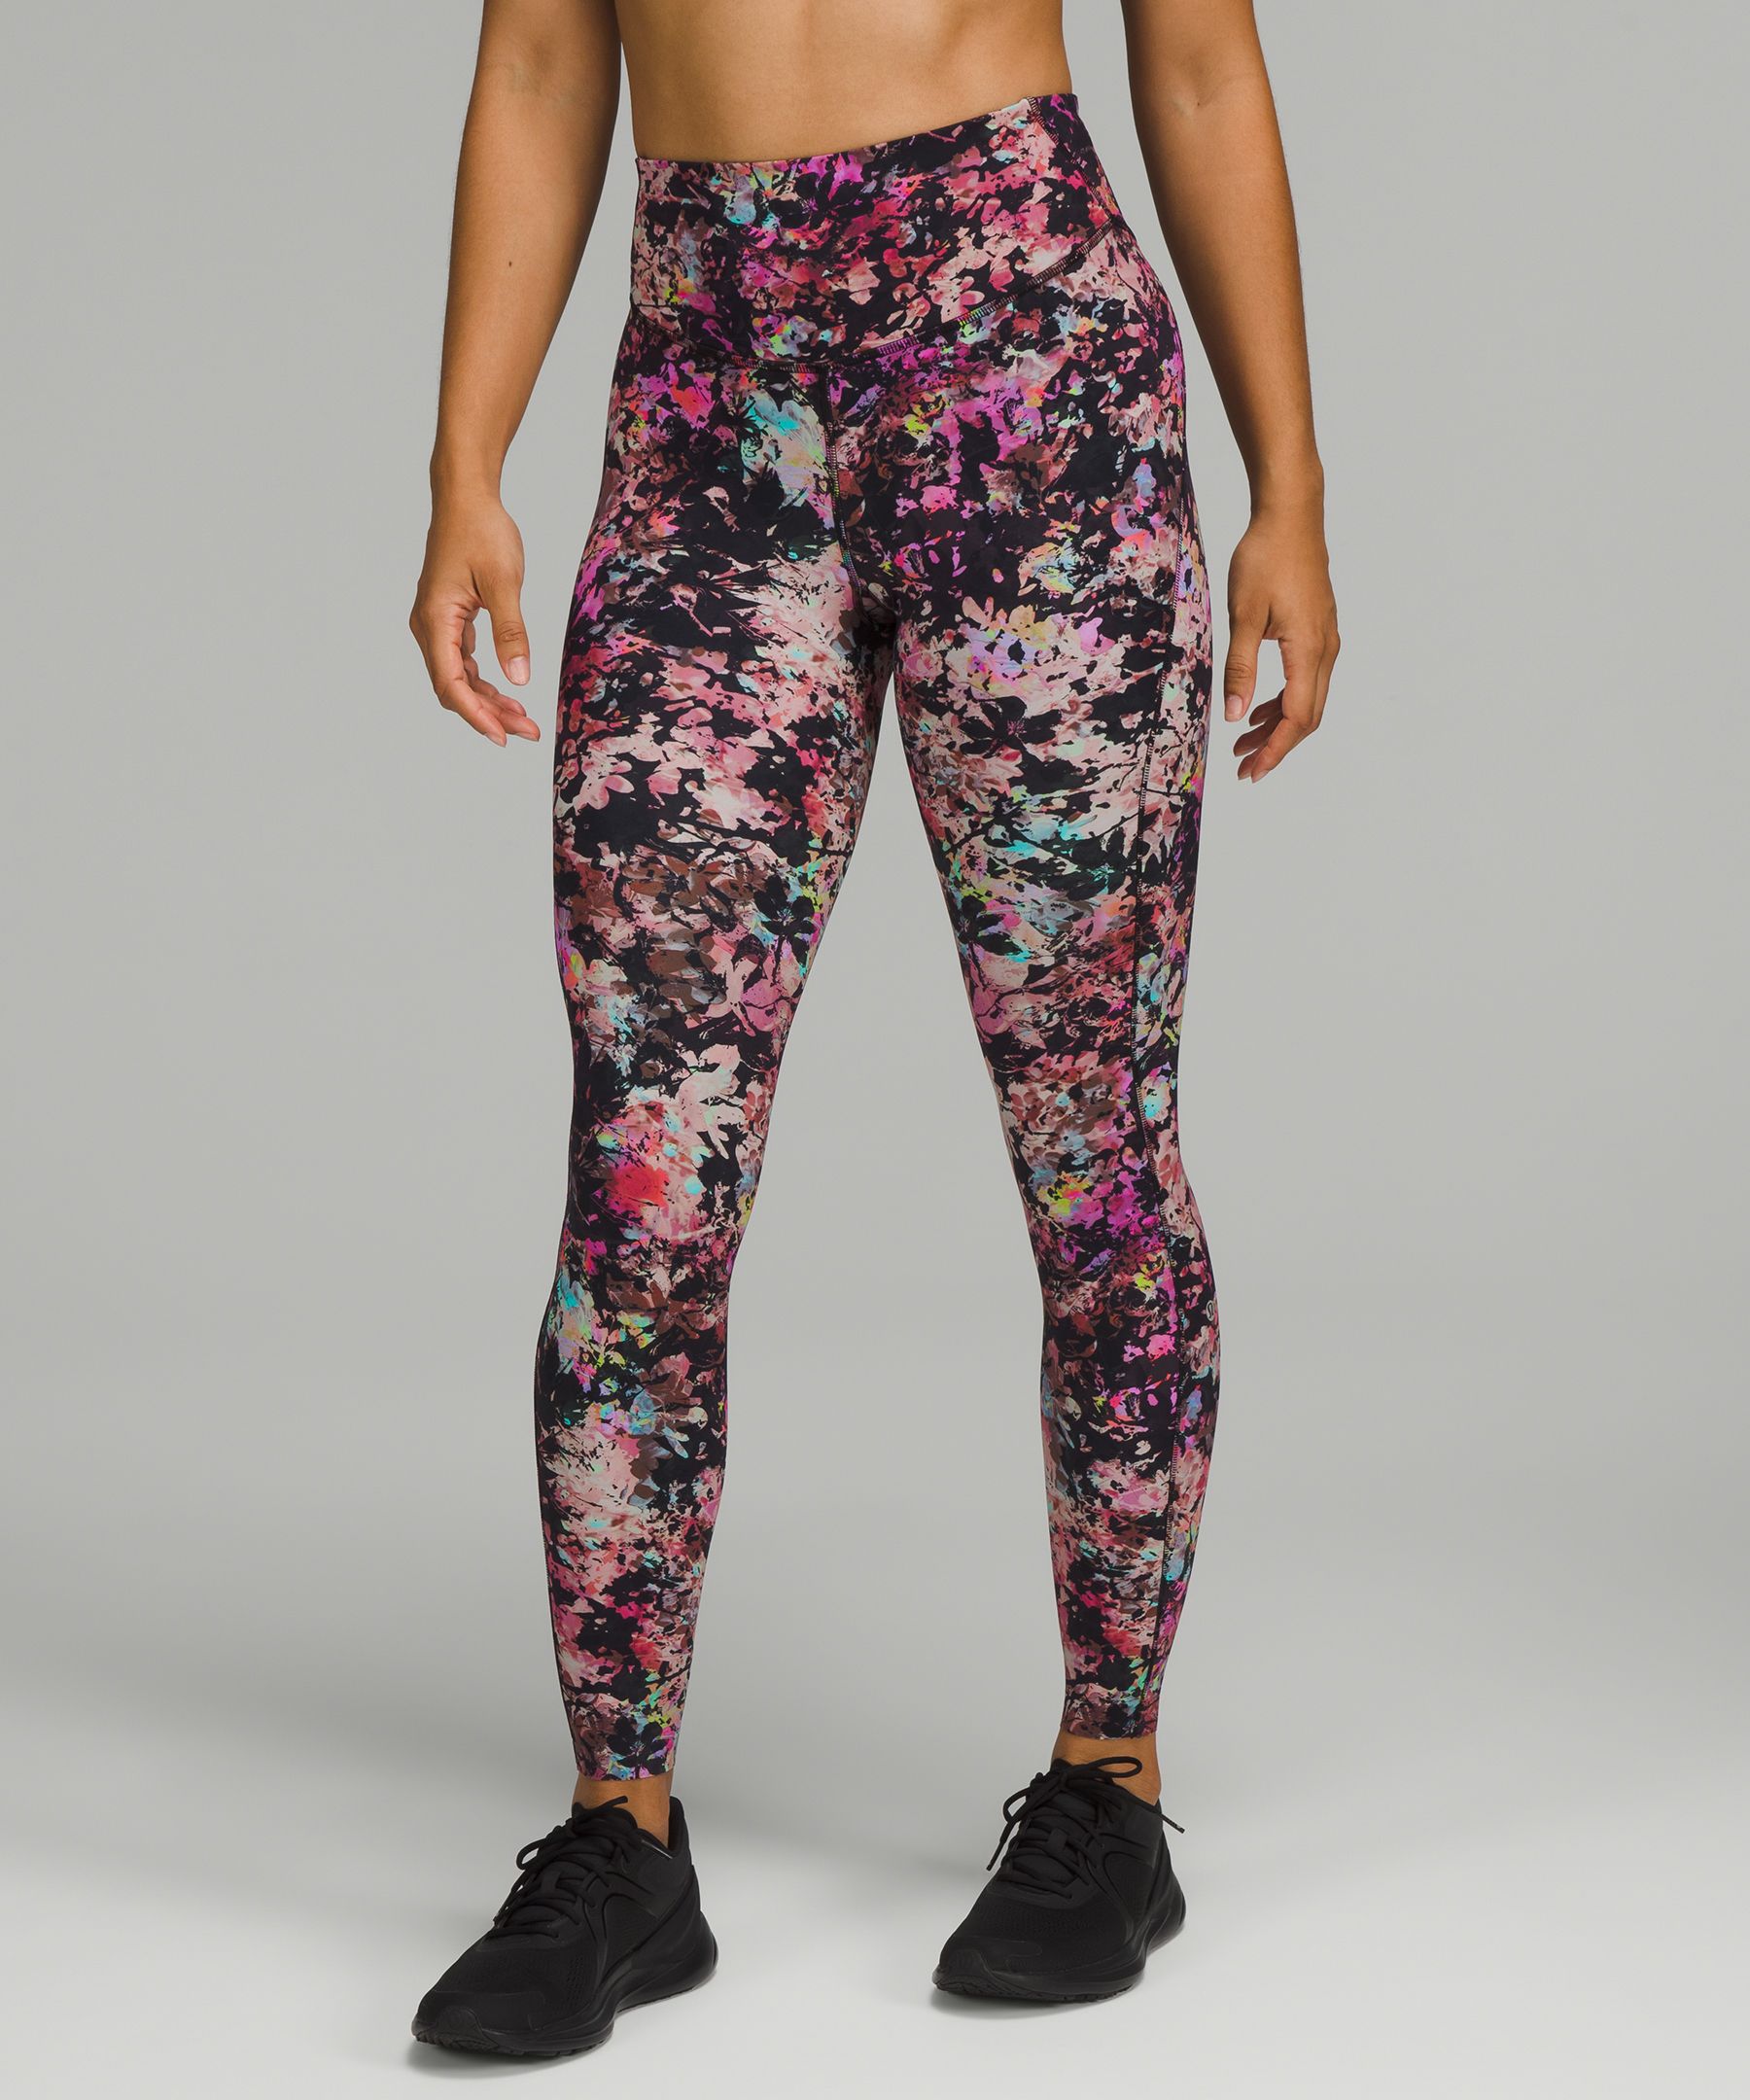 Lululemon Base Pace High-rise Running Tights 31 In Cheetah Camo